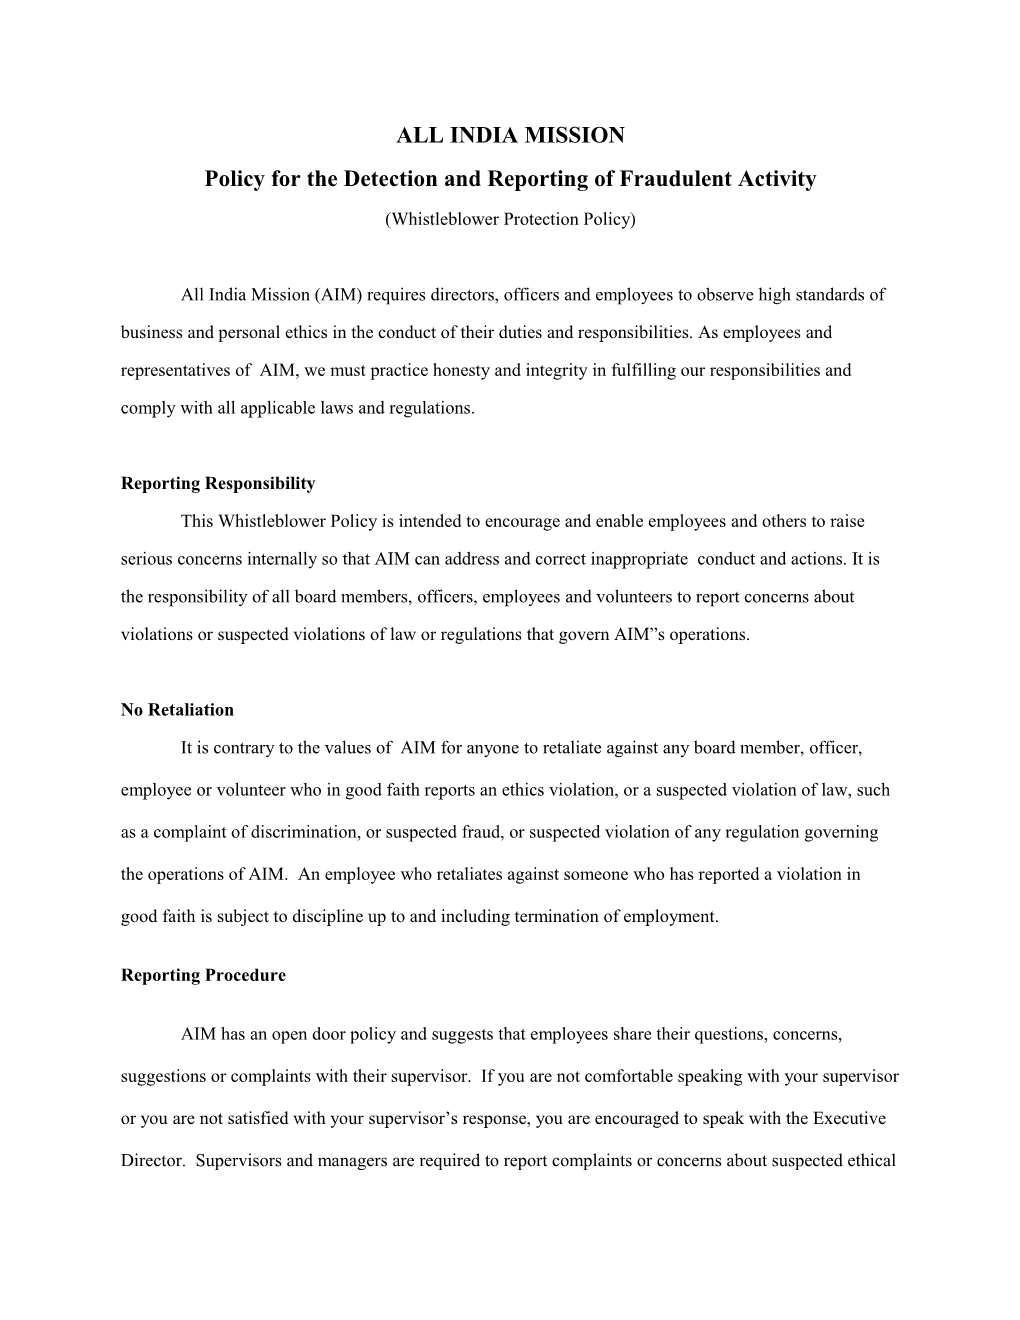 Policy for the Detection and Reporting of Fraudulent Activity